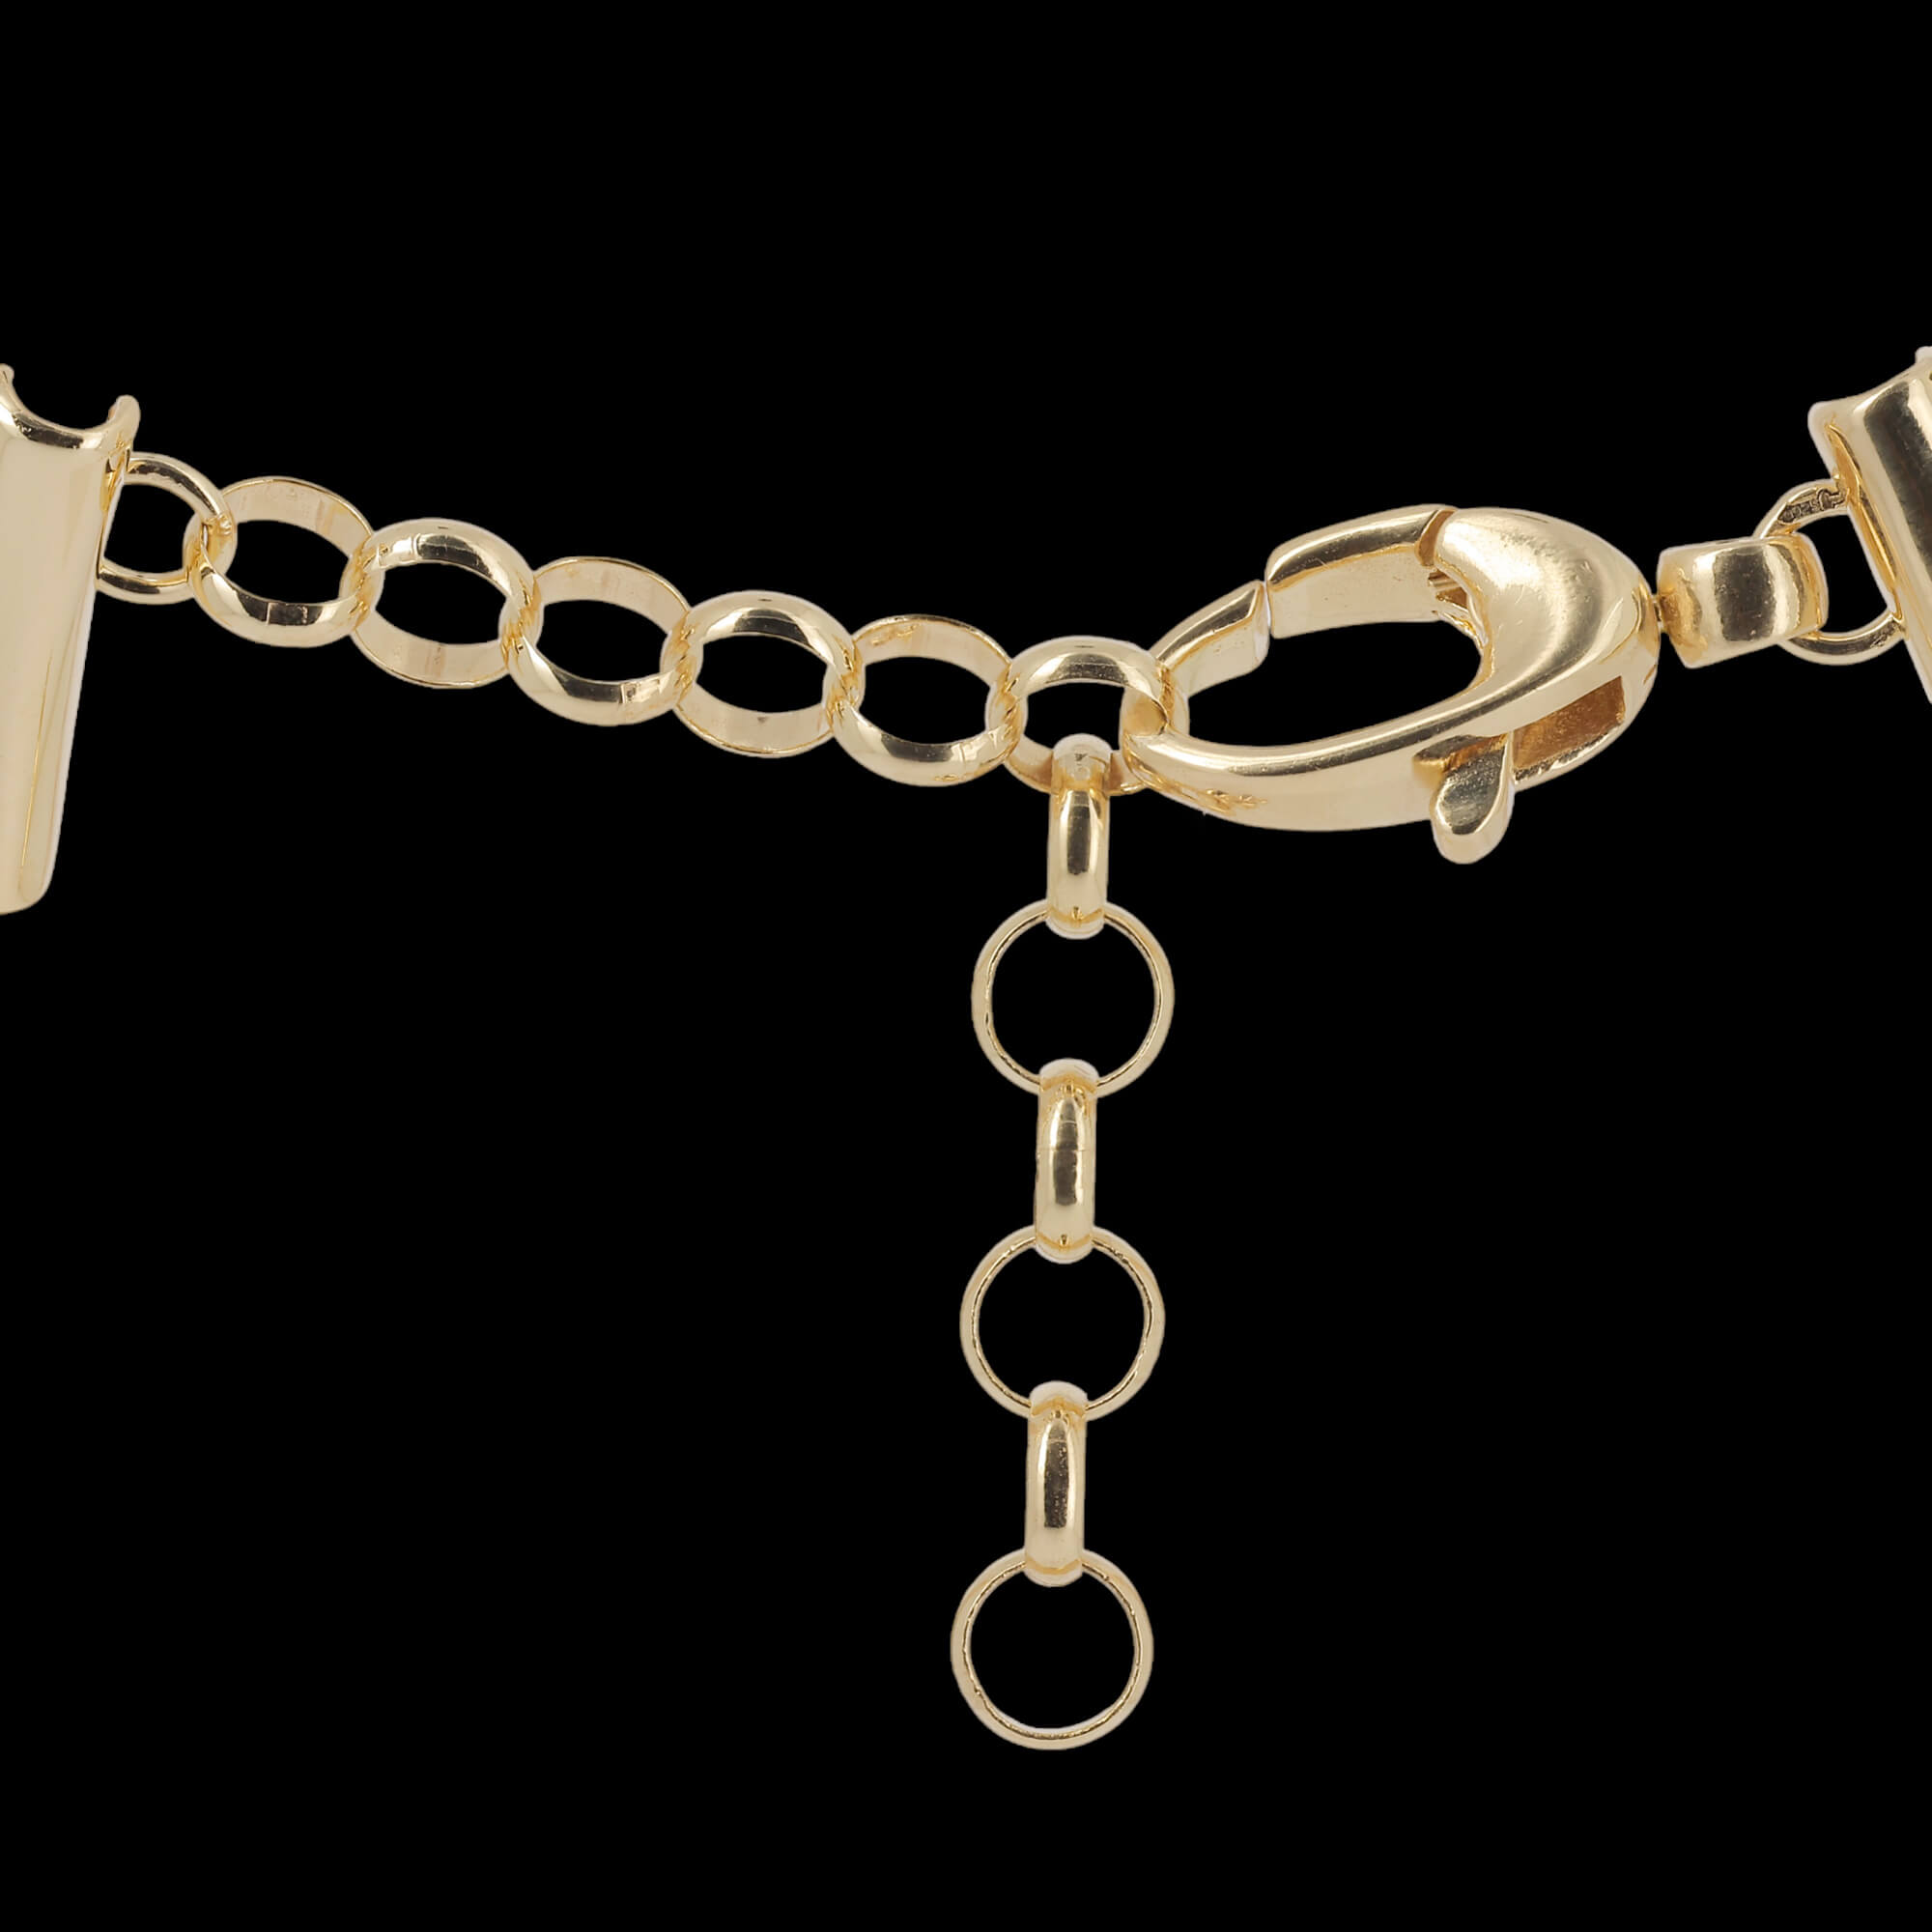 Gold and polished rod chain